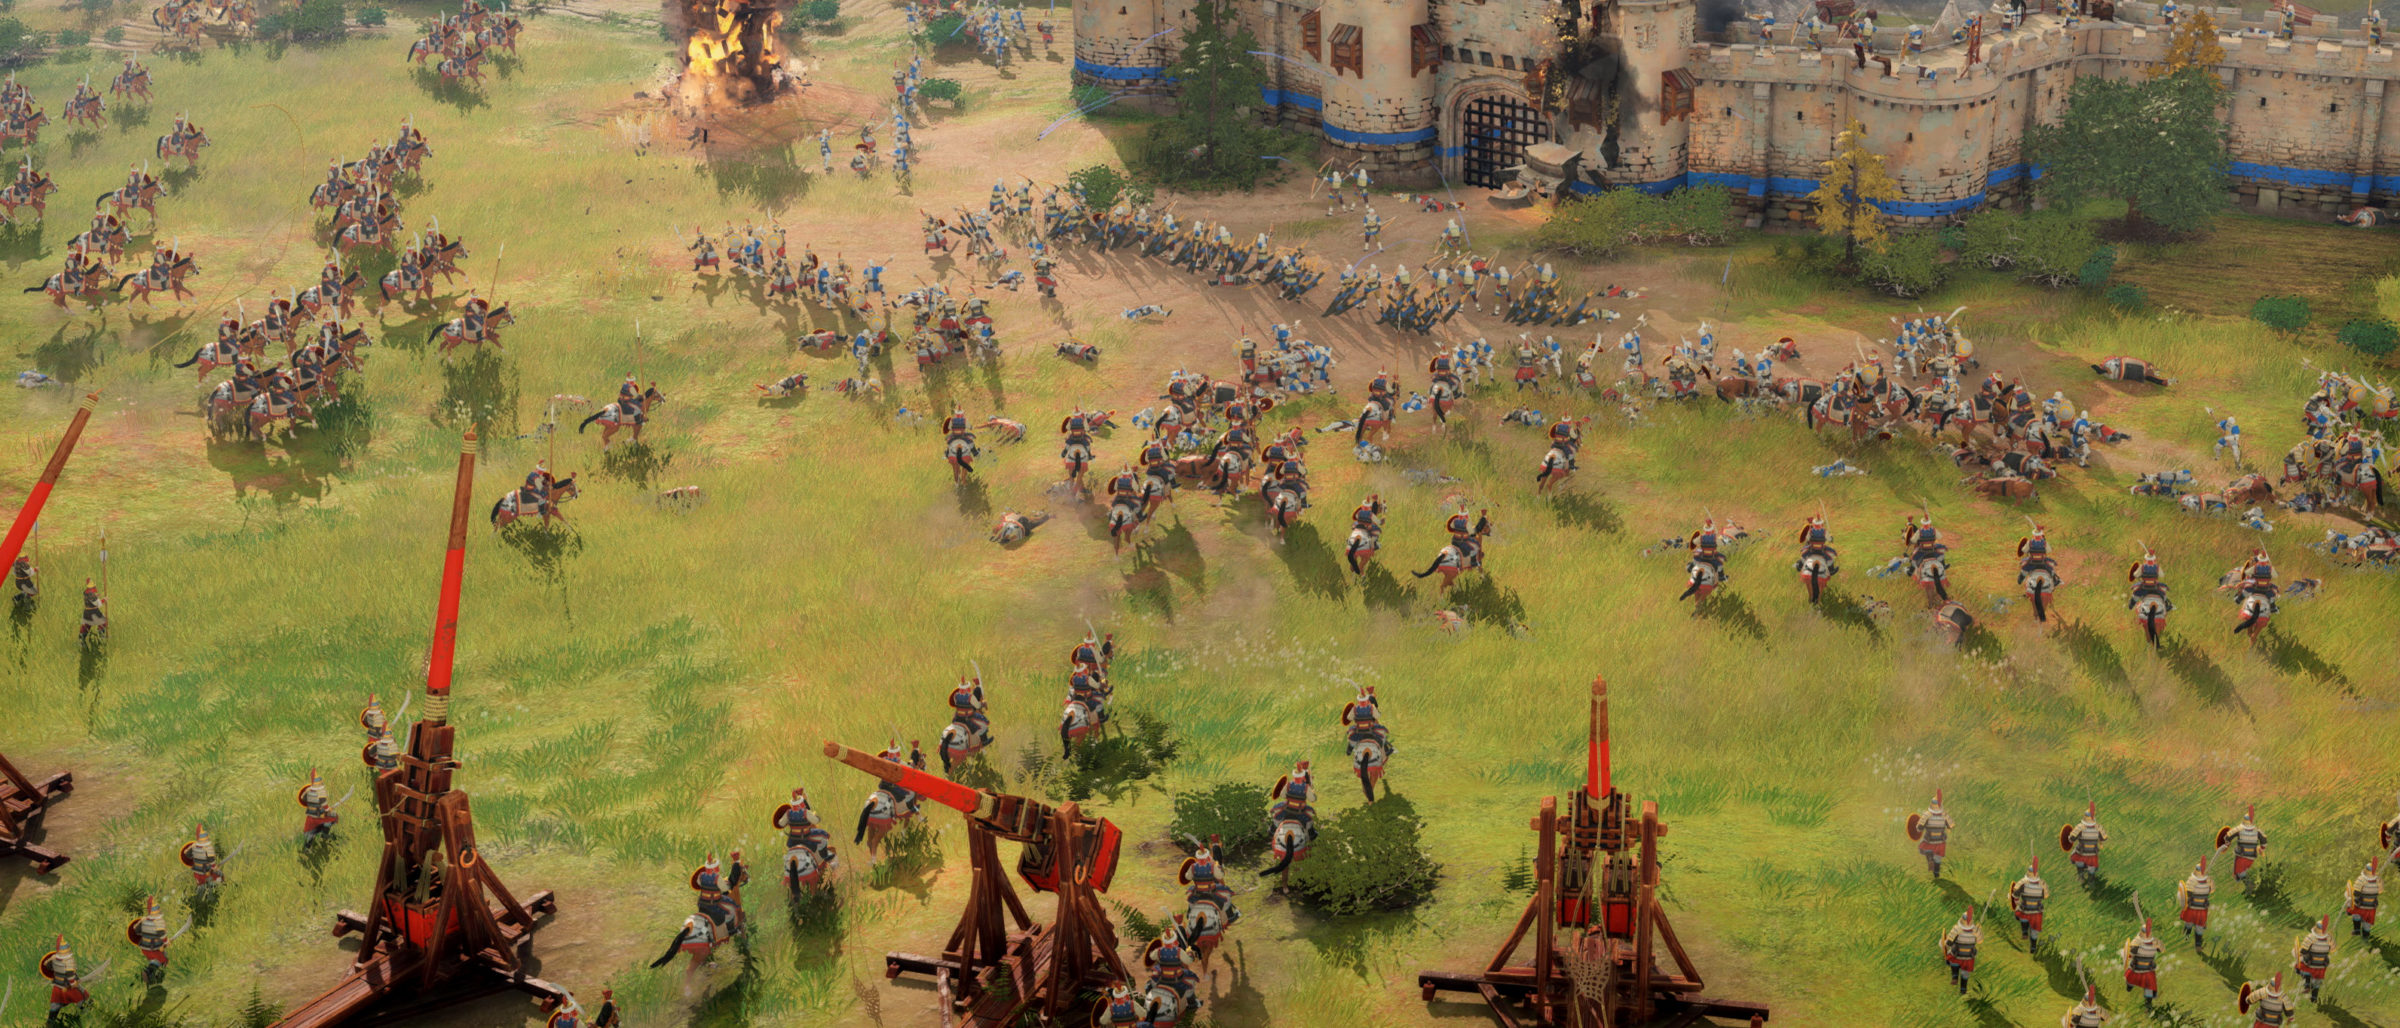 Screenshot of battle scene with trebuchets from Age of Empires game